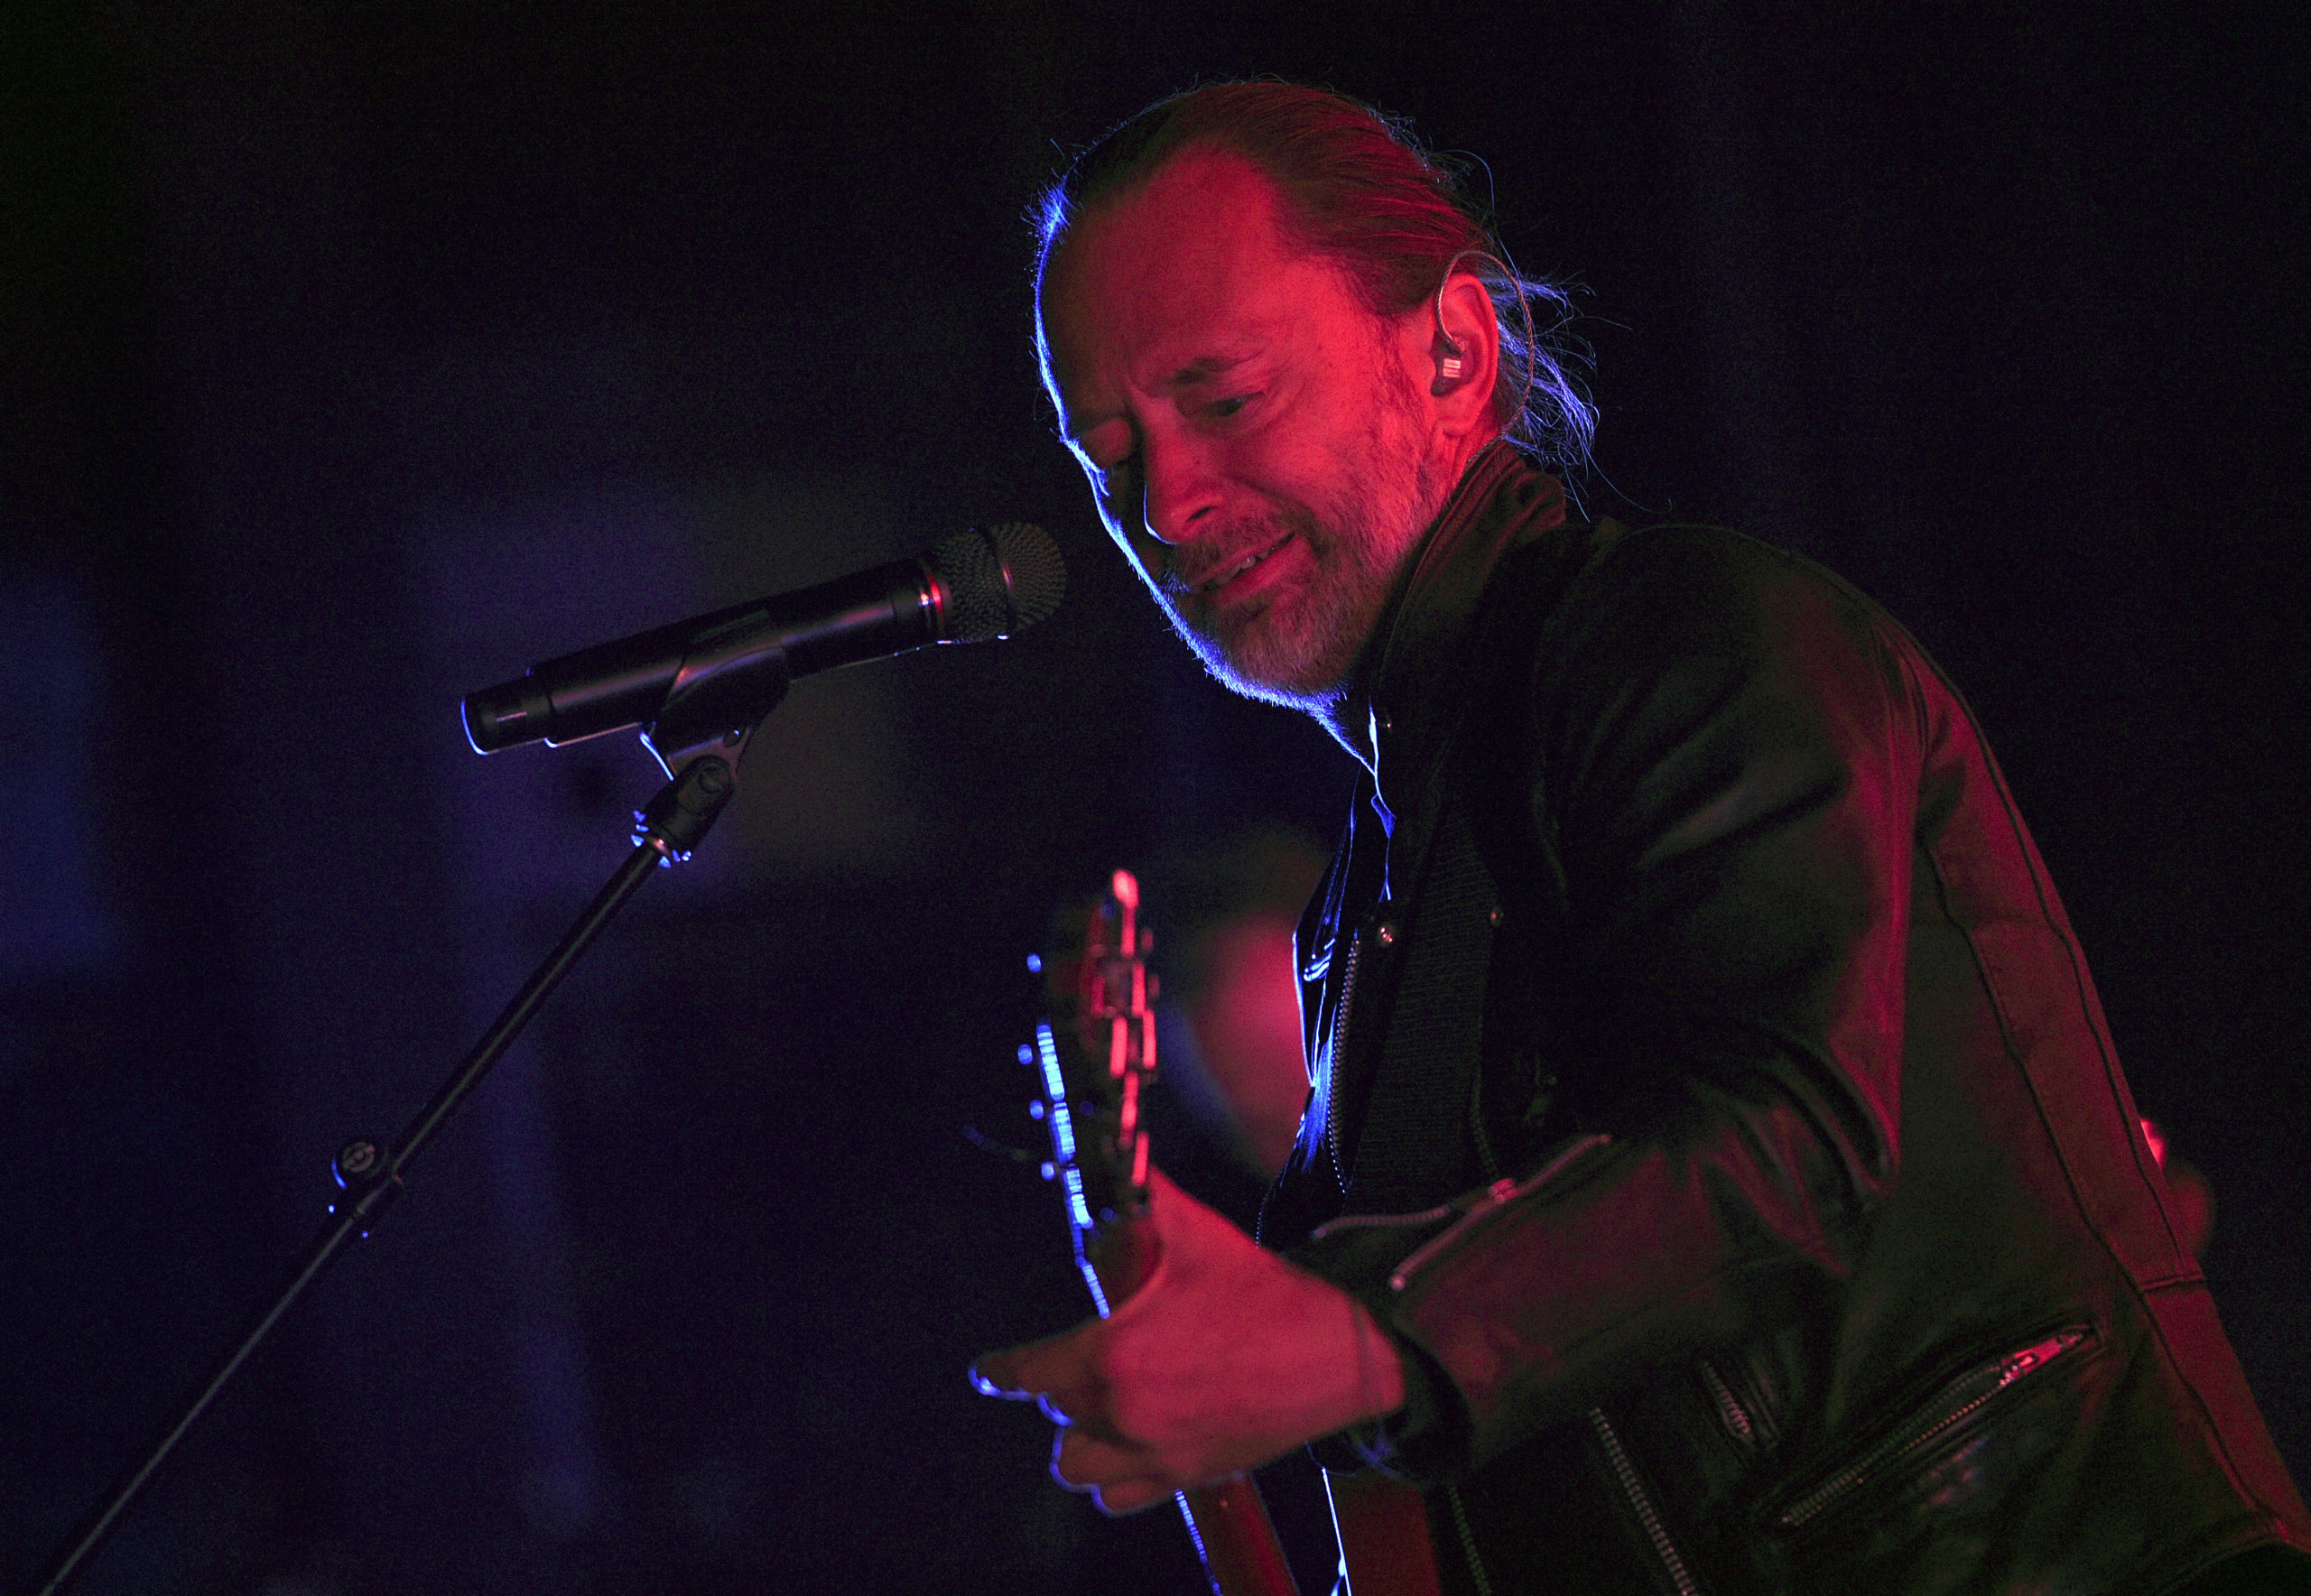 Radiohead’s Thom Yorke Releases Surprise Solo Song “5.17”